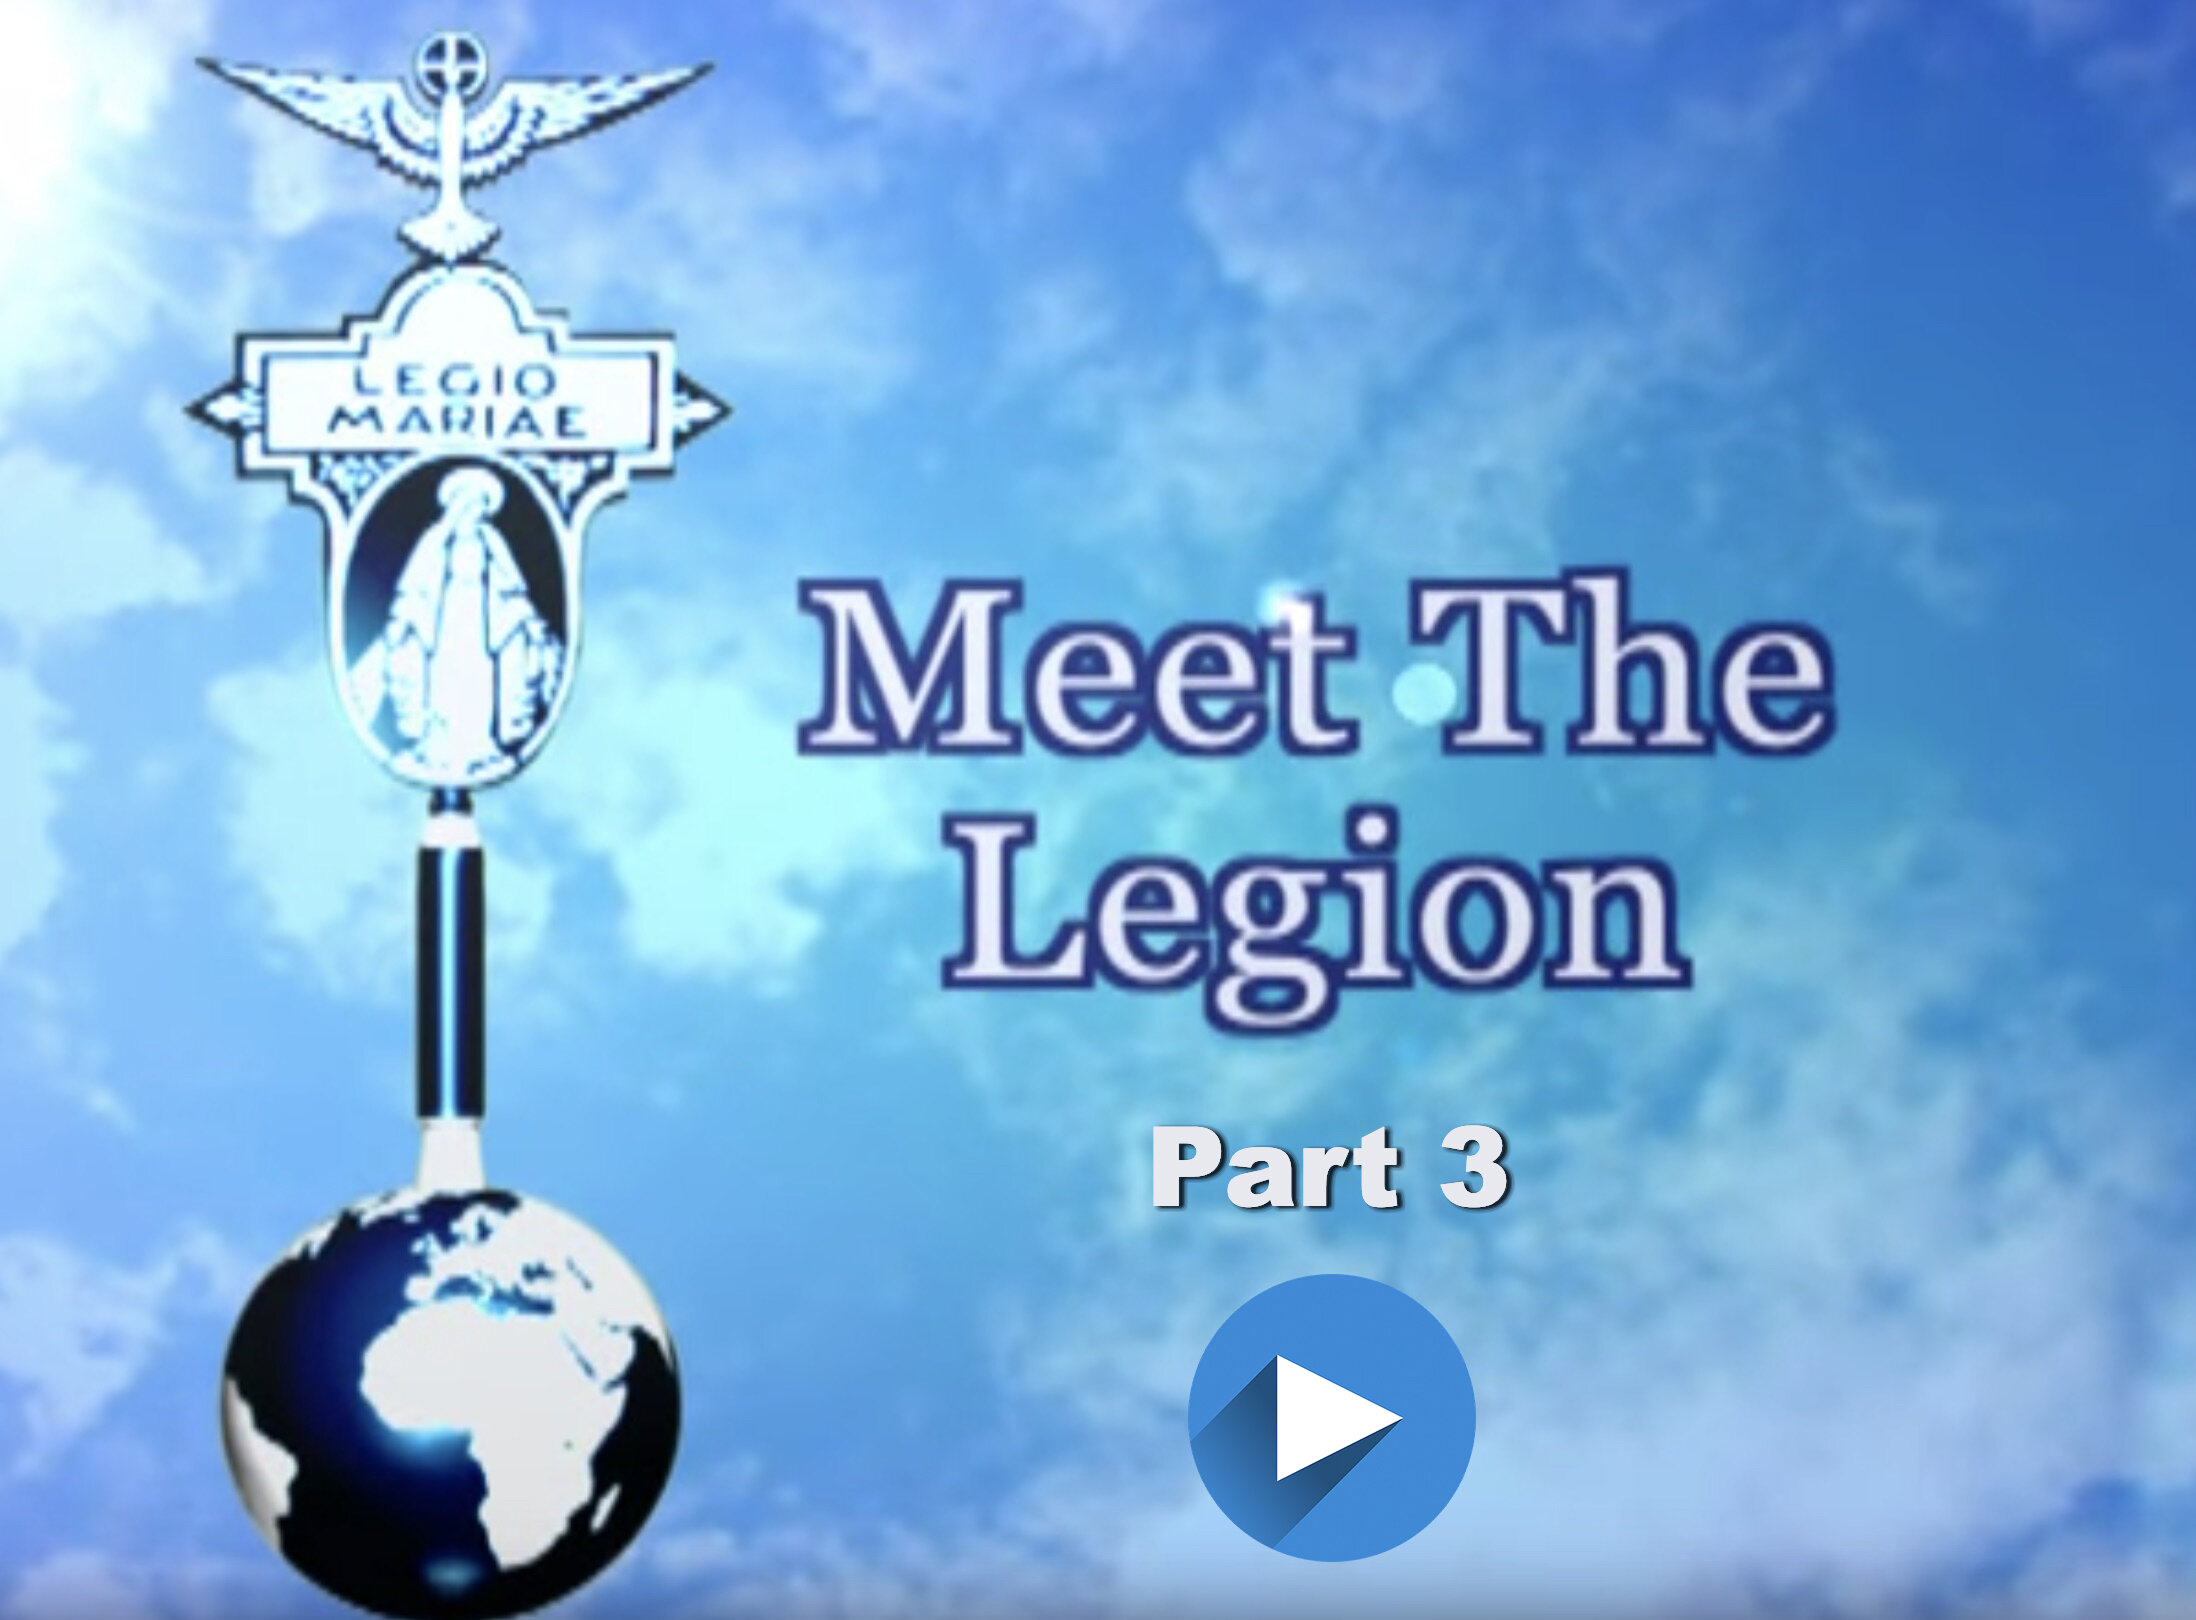 LEGION OF MARY VIDEO COVER with arrow PART 3.jpg